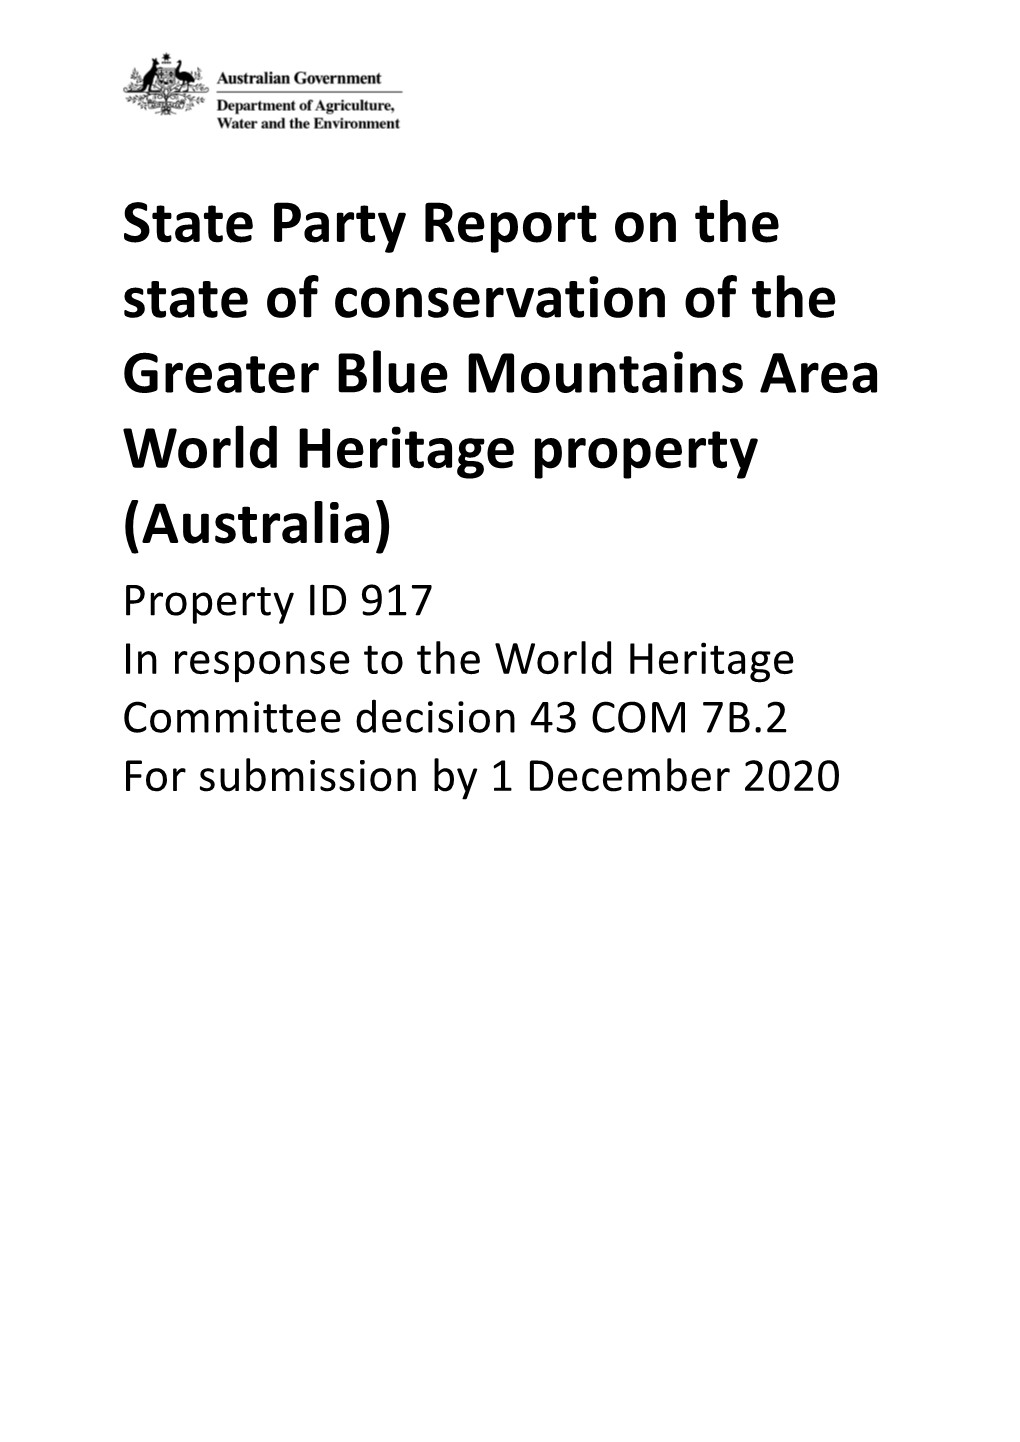 State Party Report on the State of Conservation of the Greater Blue Mountains Area World Heritage Property (Australia)